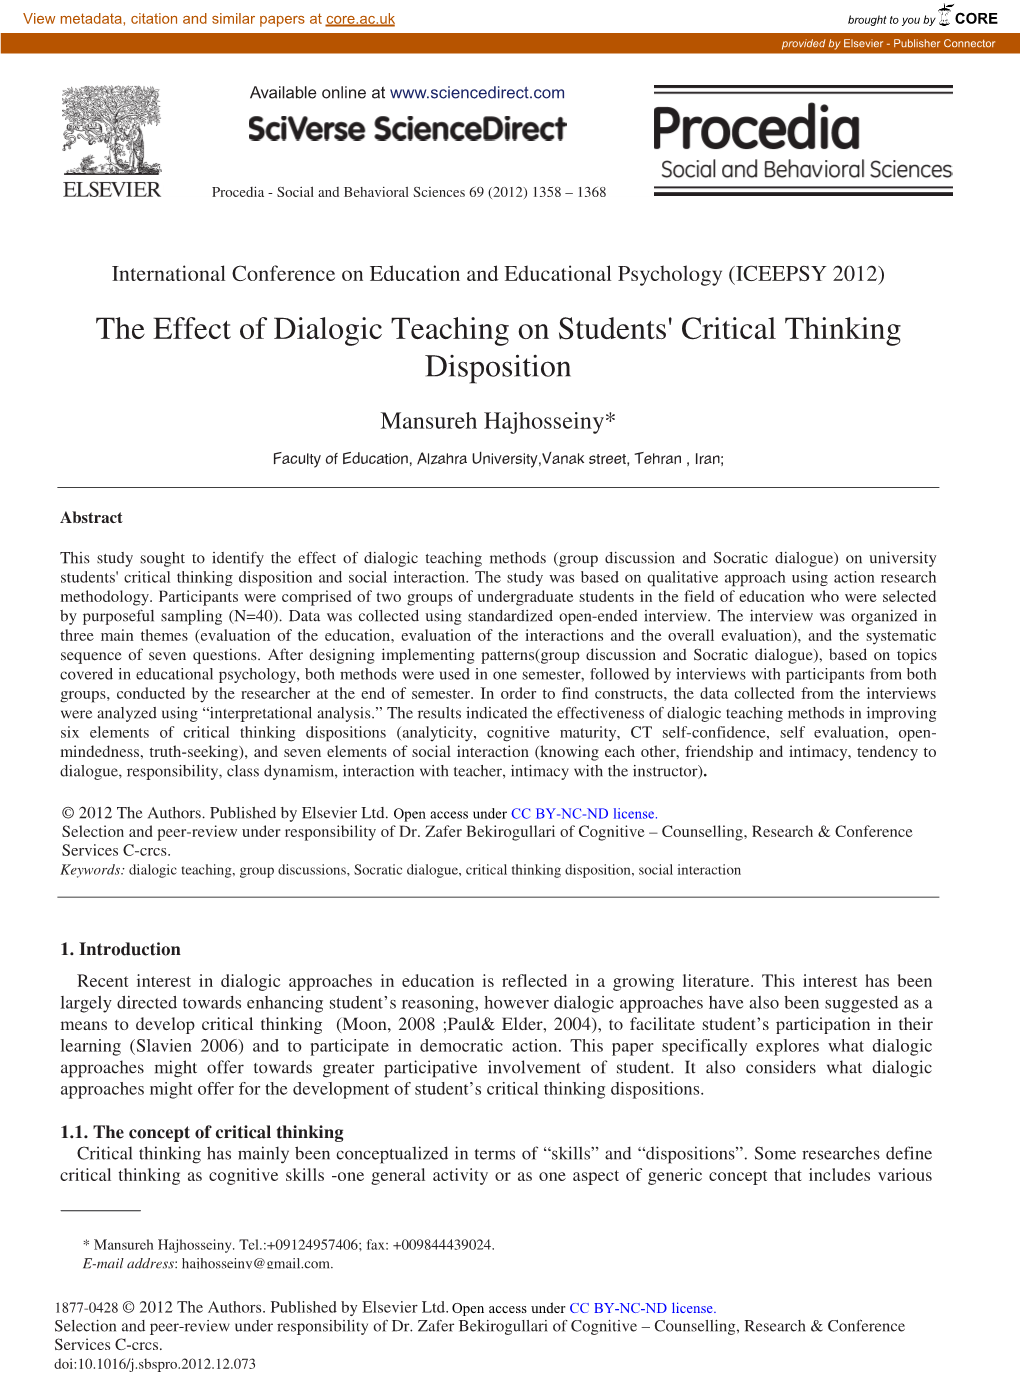 The Effect of Dialogic Teaching on Students' Critical Thinking Disposition